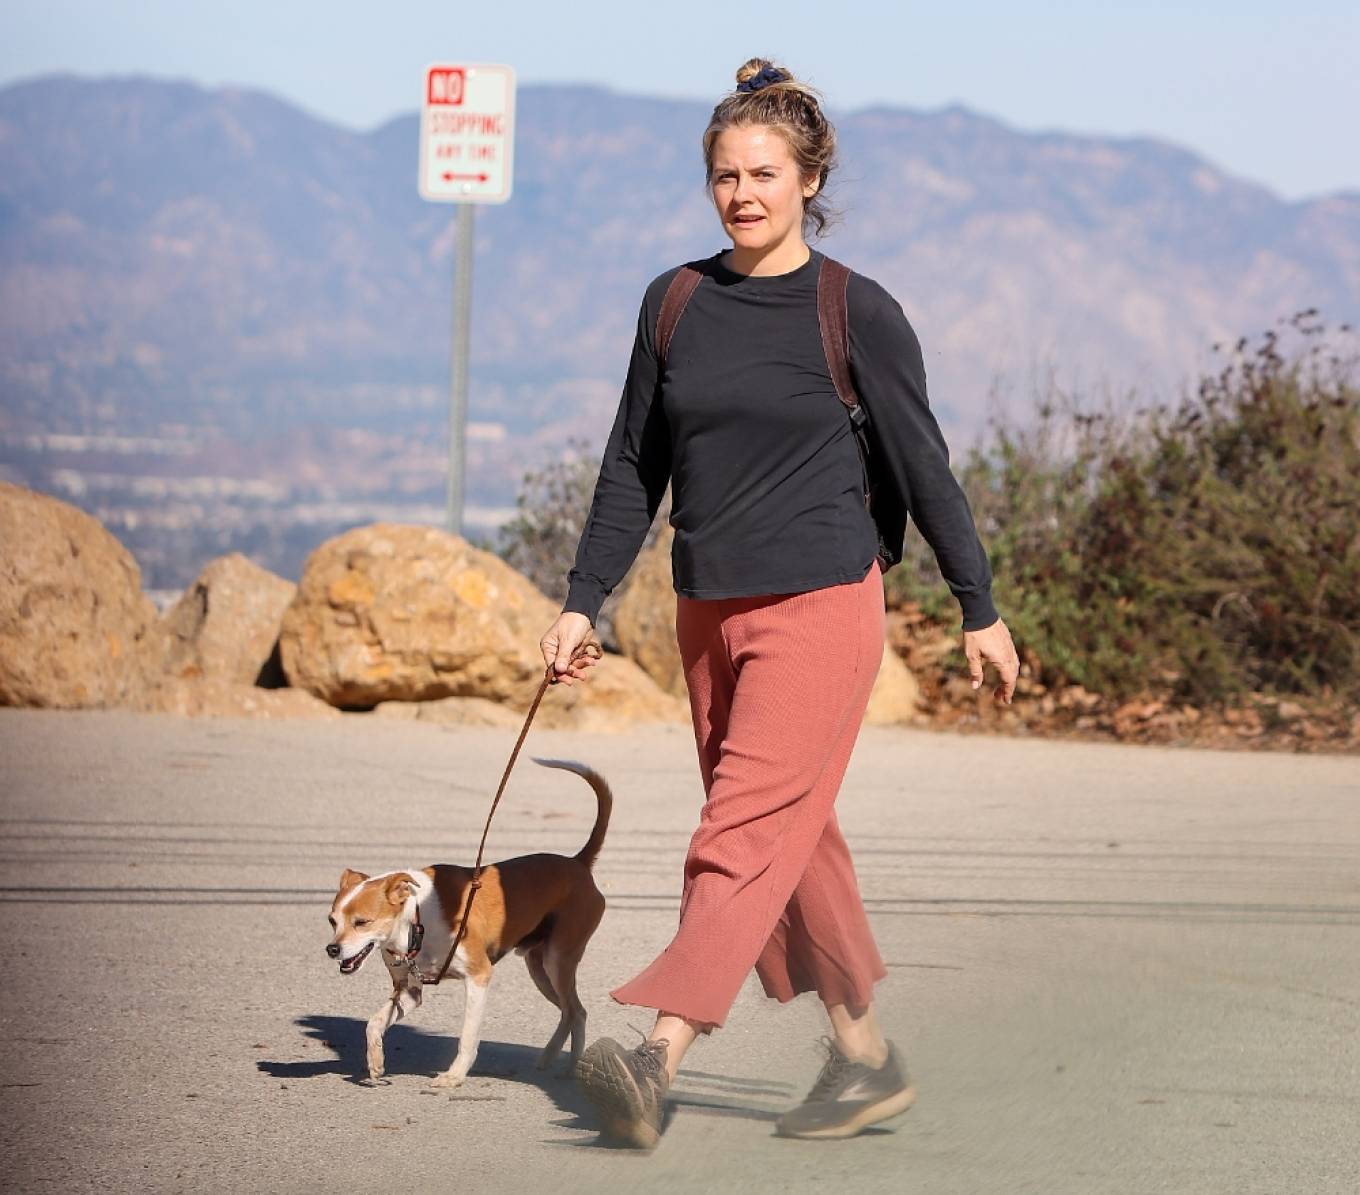 Alicia Silverstone 2021 : Alicia Silverstone – Seen while takes her dog for a walk-10